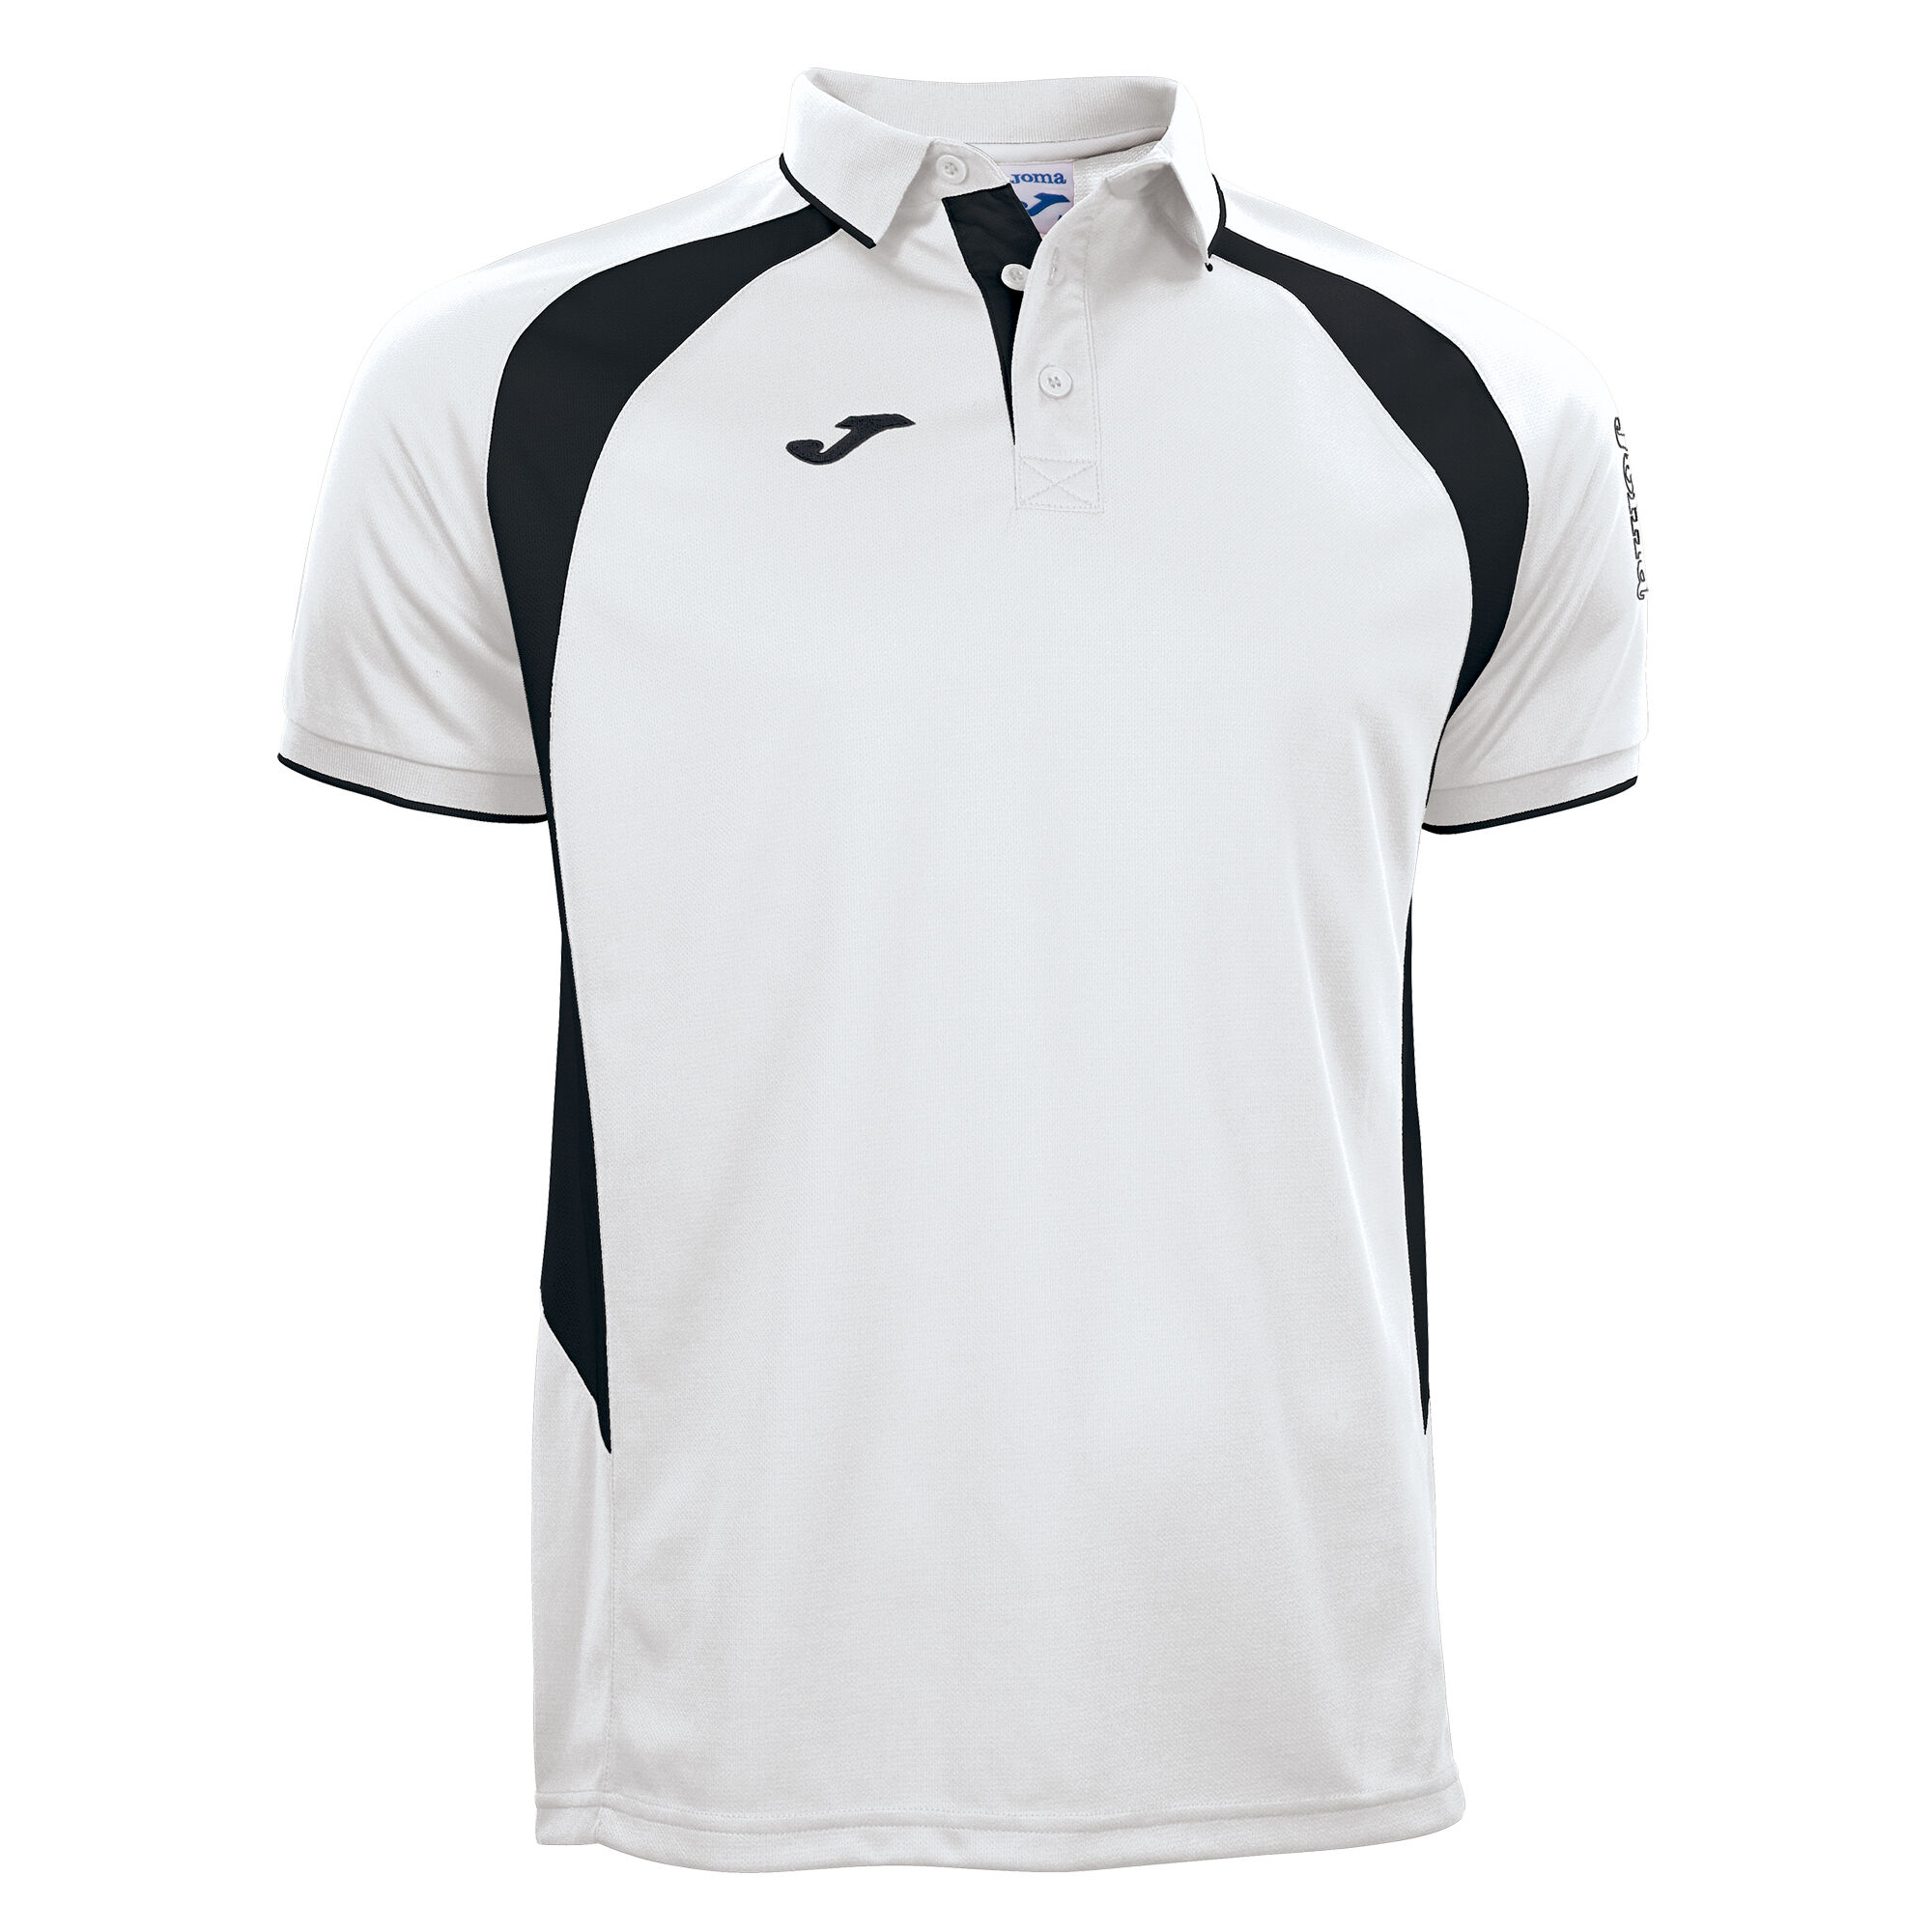 POLO MANCHES COURTES HOMME CHAMPIONSHIP III BLANC NOIR